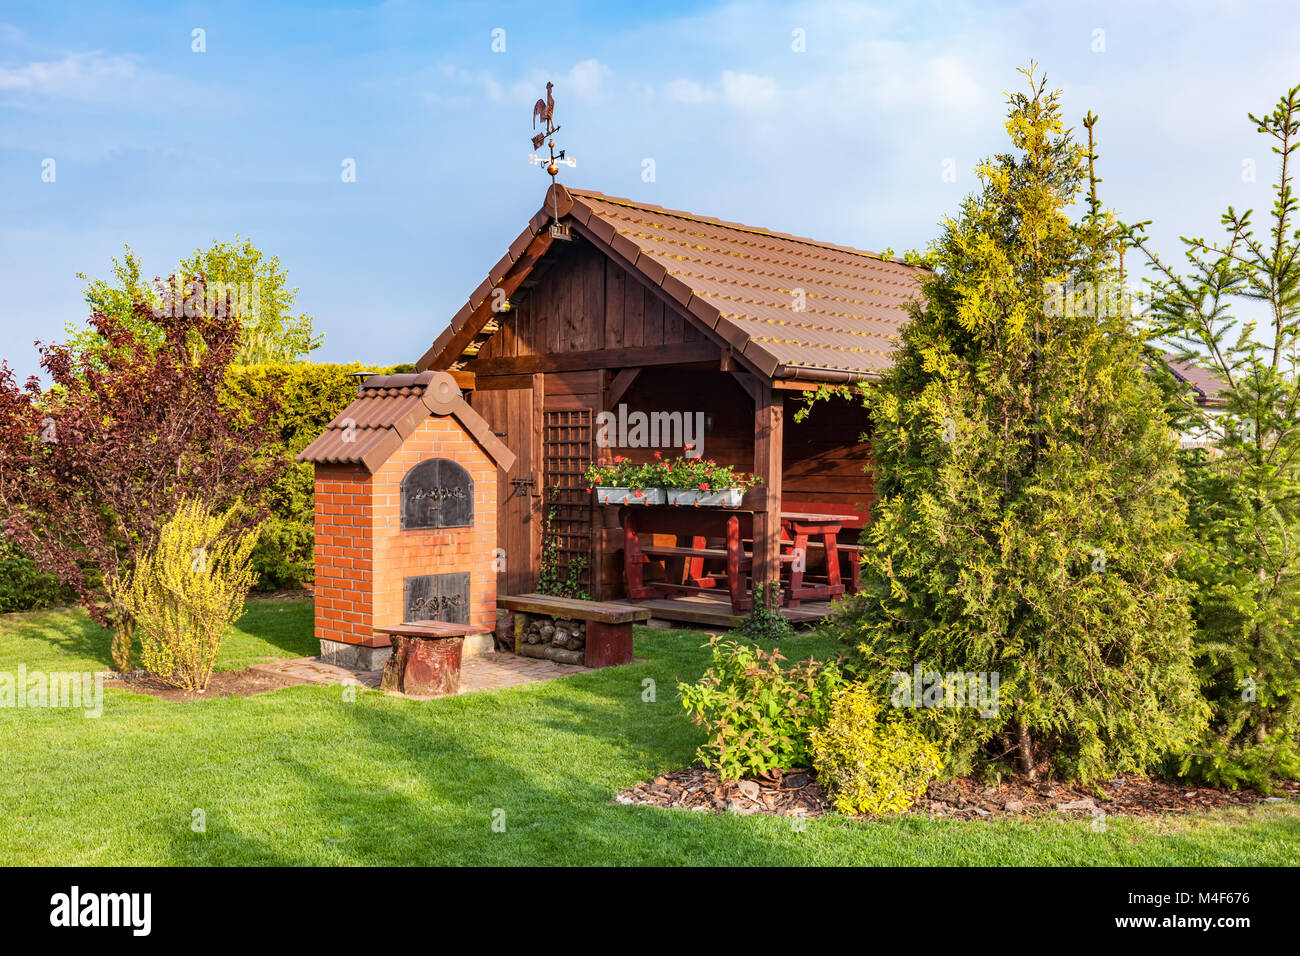 Landscaped summer garden with barbecue and wooden summerhouse Stock Photo